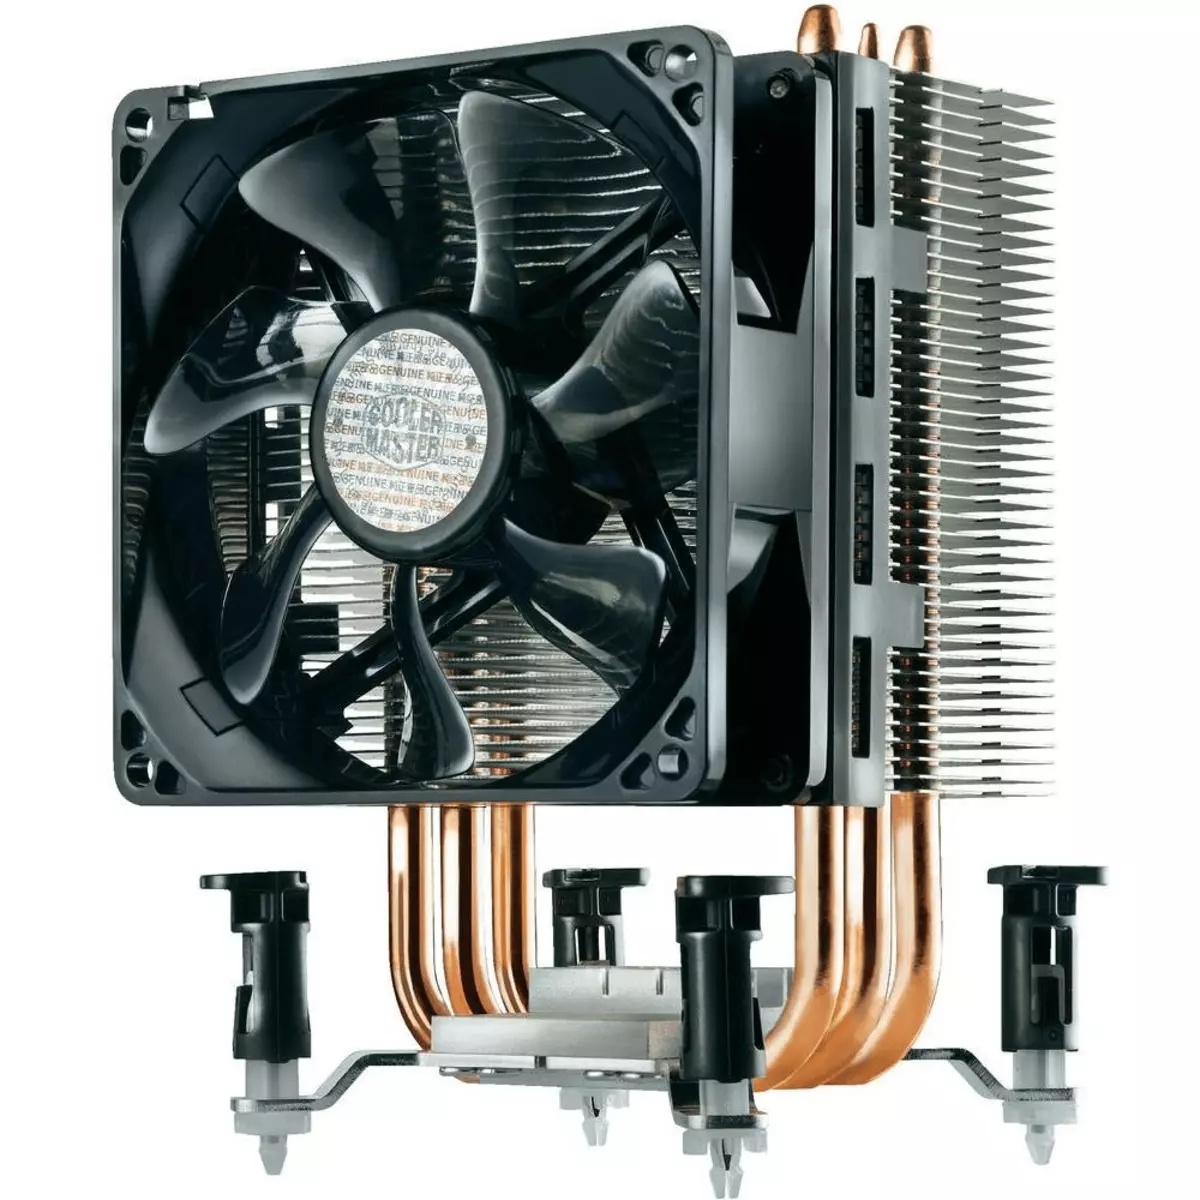 Tower cooler for processor with thermal tubes